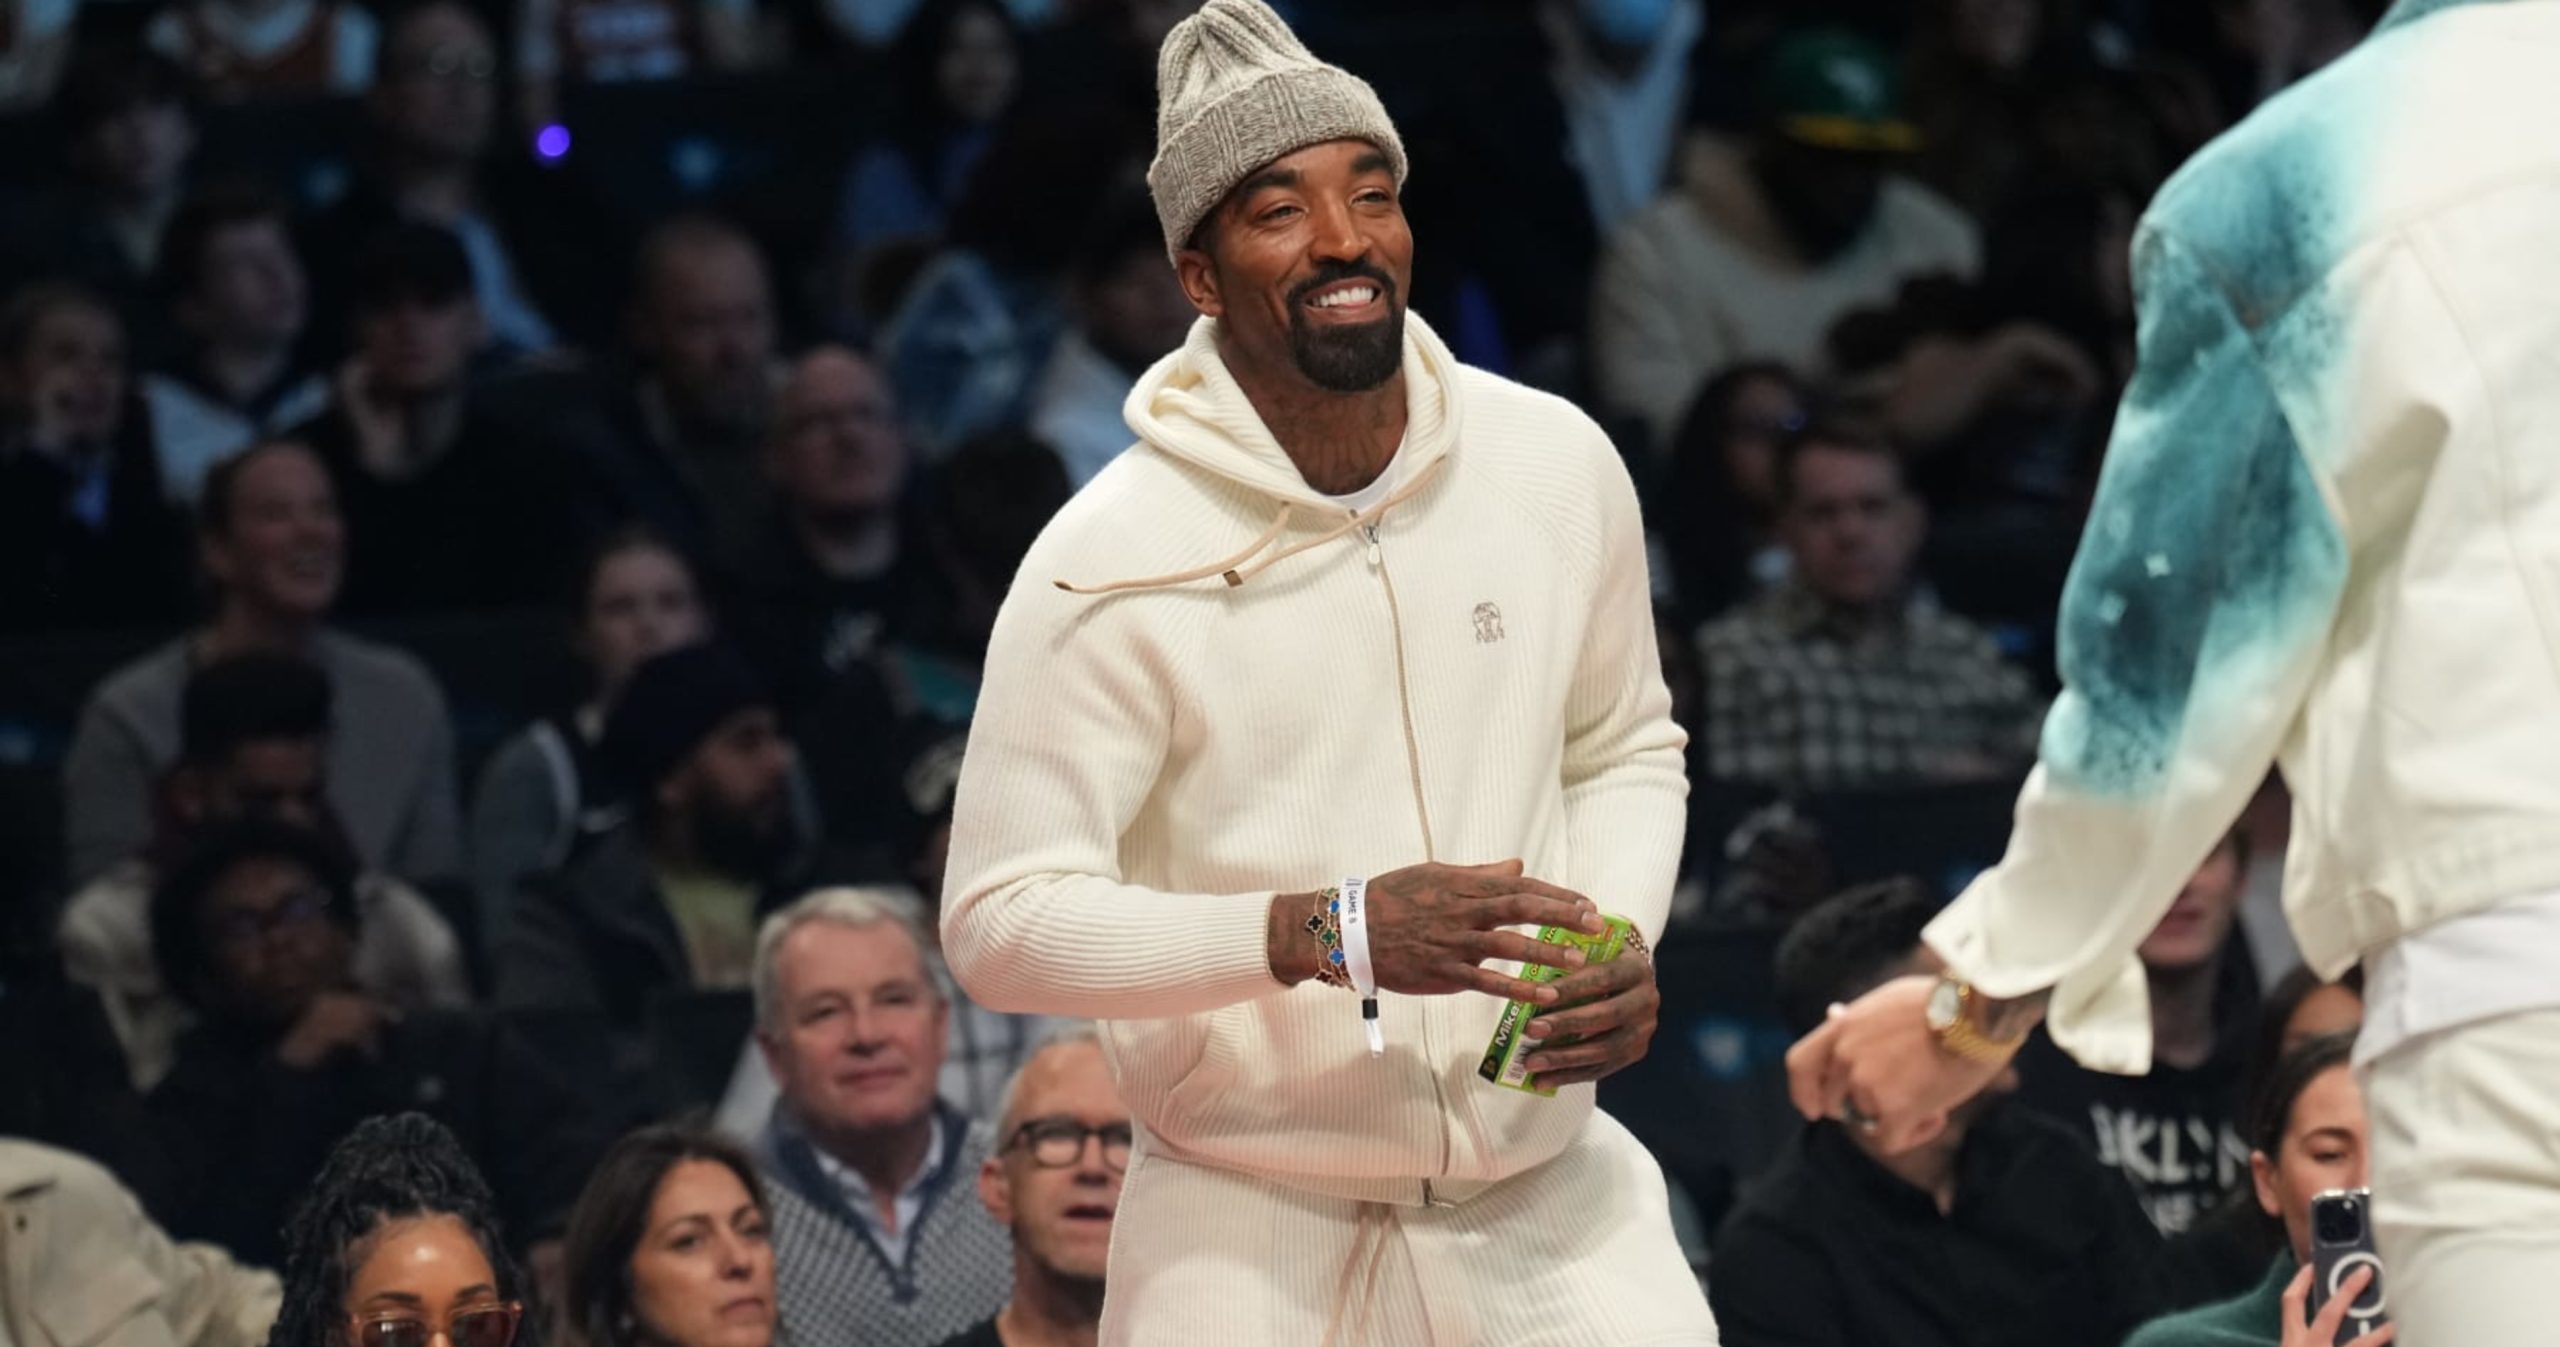 J.R. Smith Issues Stern Warning to Dan Hurley about Lakers Coaching Job